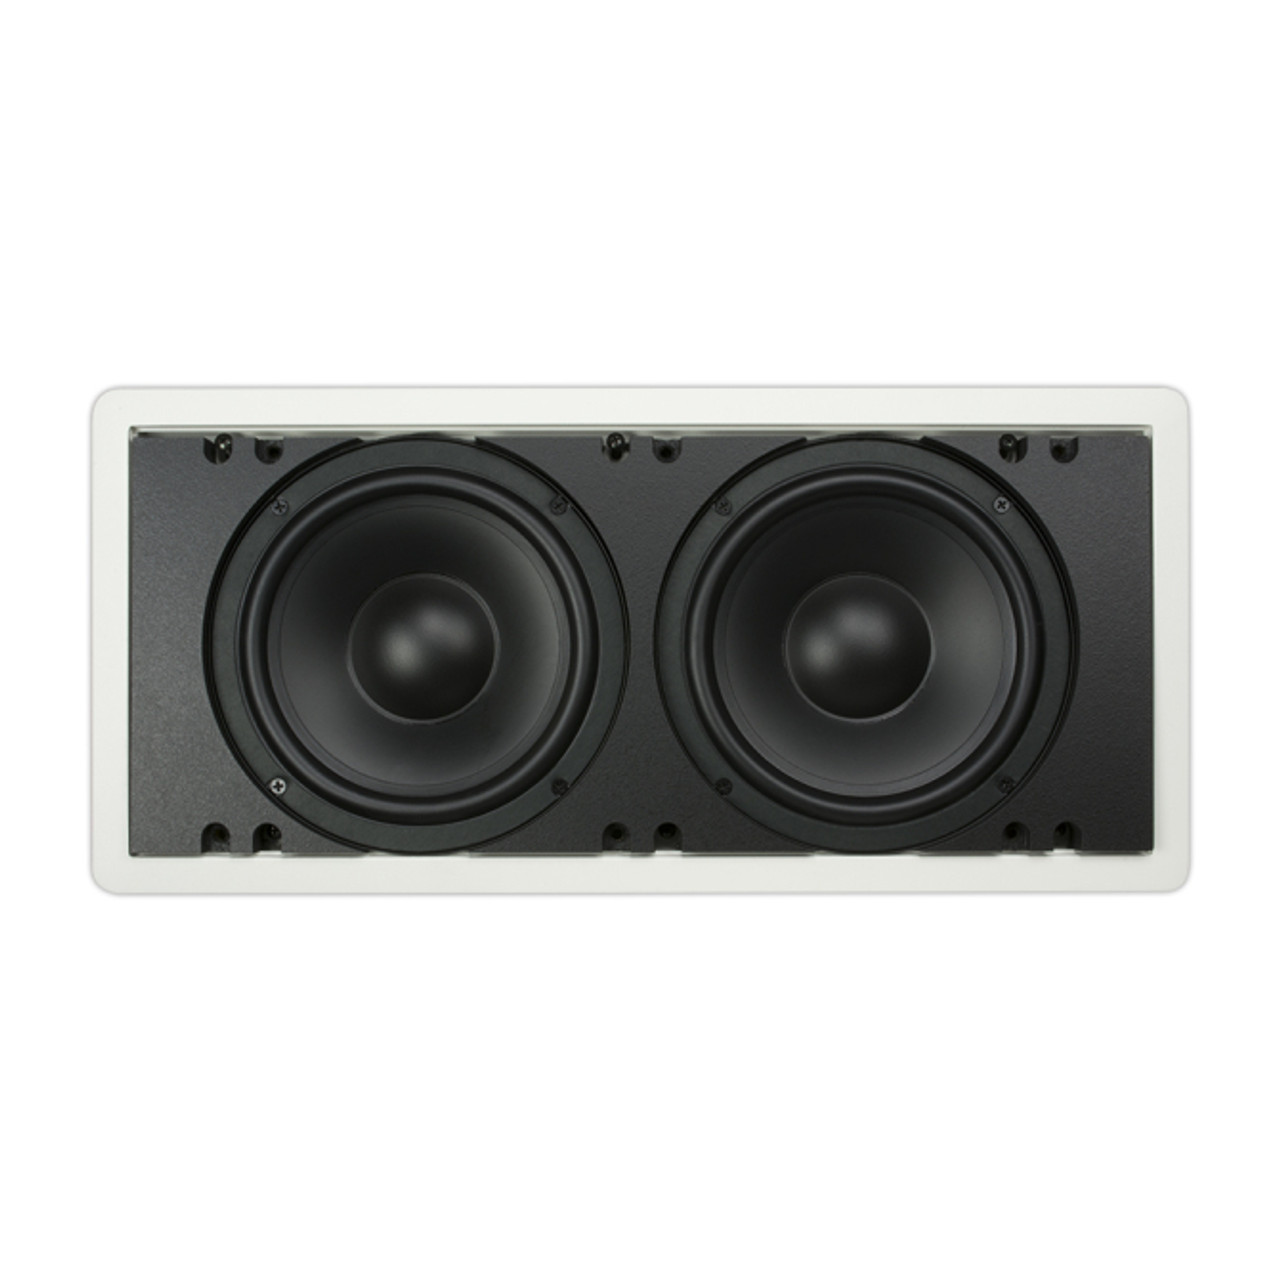 Phase Technology IW200 SUB KIT In-Wall 8-inch Subwoofer with Back Box (IW200 SUB KIT)